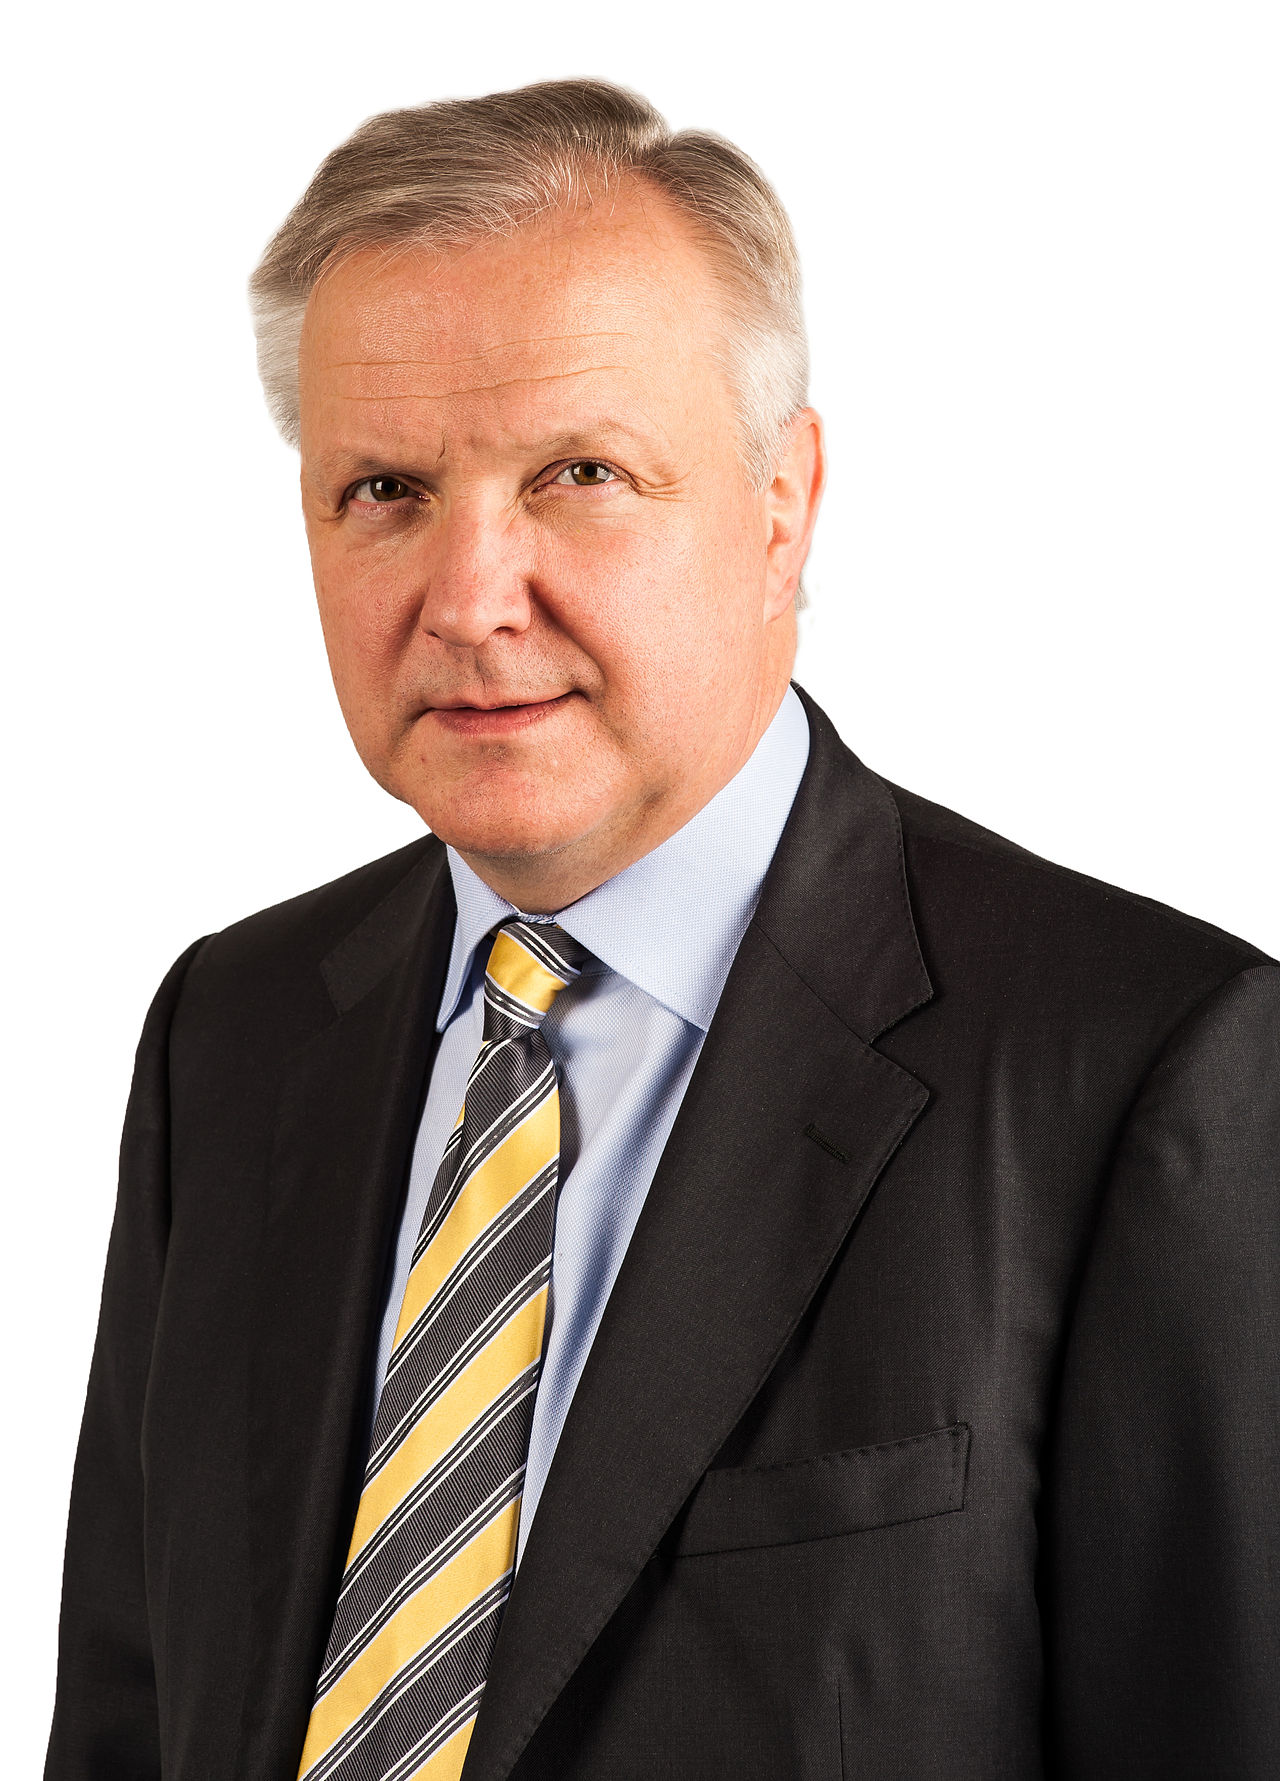 Olli Rehn Elected First Vice-Chair of European Systemic Risk Board, Brings Extensive Experience to Oversee Financial Stability in the EU